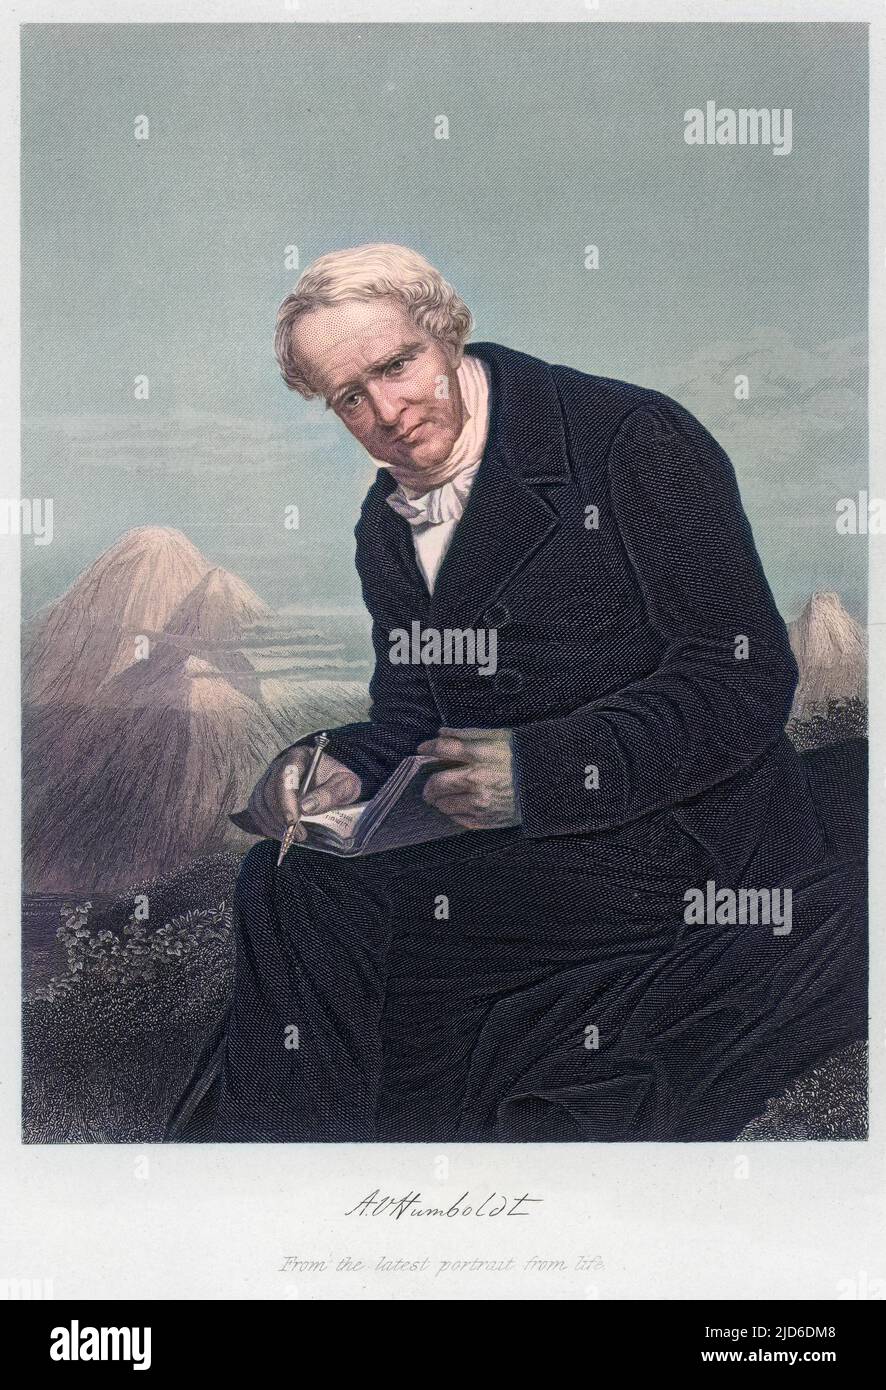 ALEXANDER VON HUMBOLDT (1769 - 1859), German traveler and naturalist with his autograph. Colourised version of : 10179032 Stock Photo